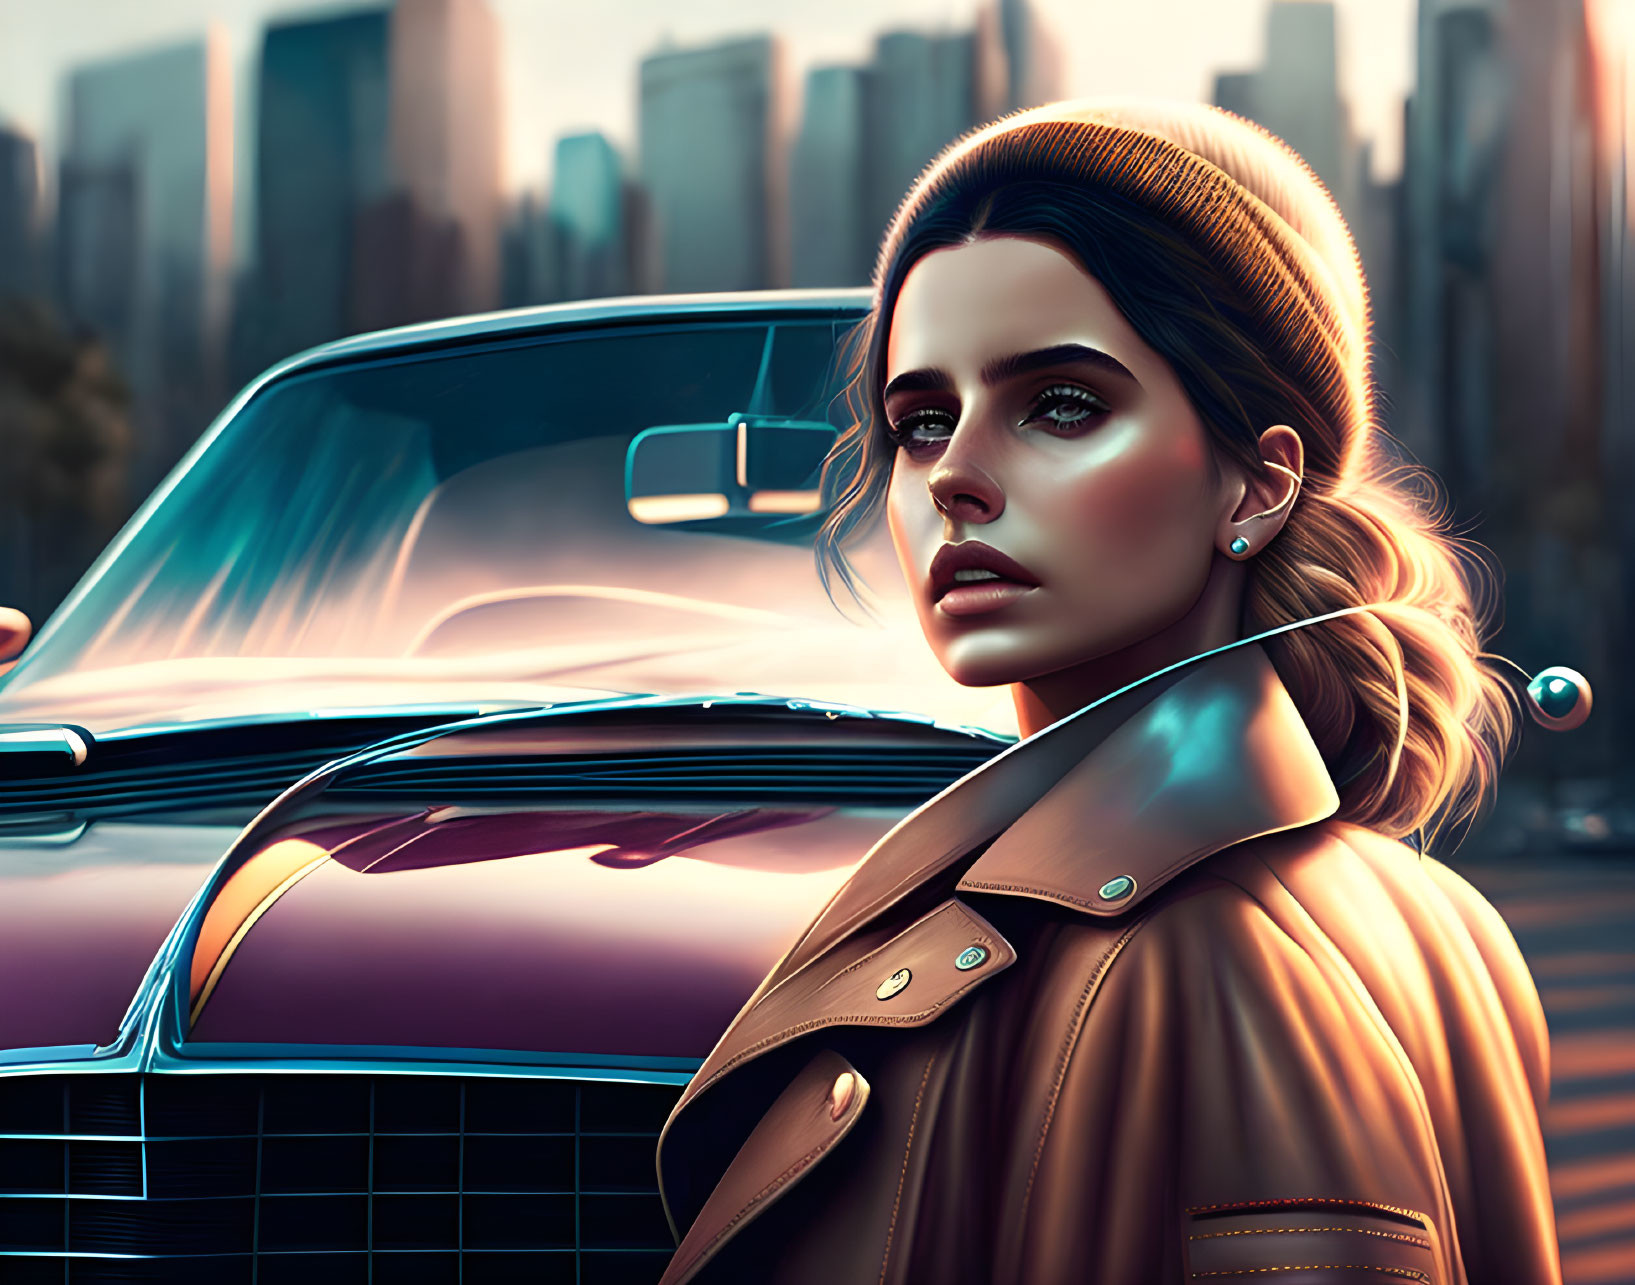 Stylized illustration of woman in beanie and coat leaning against classic car in golden hour cityscape